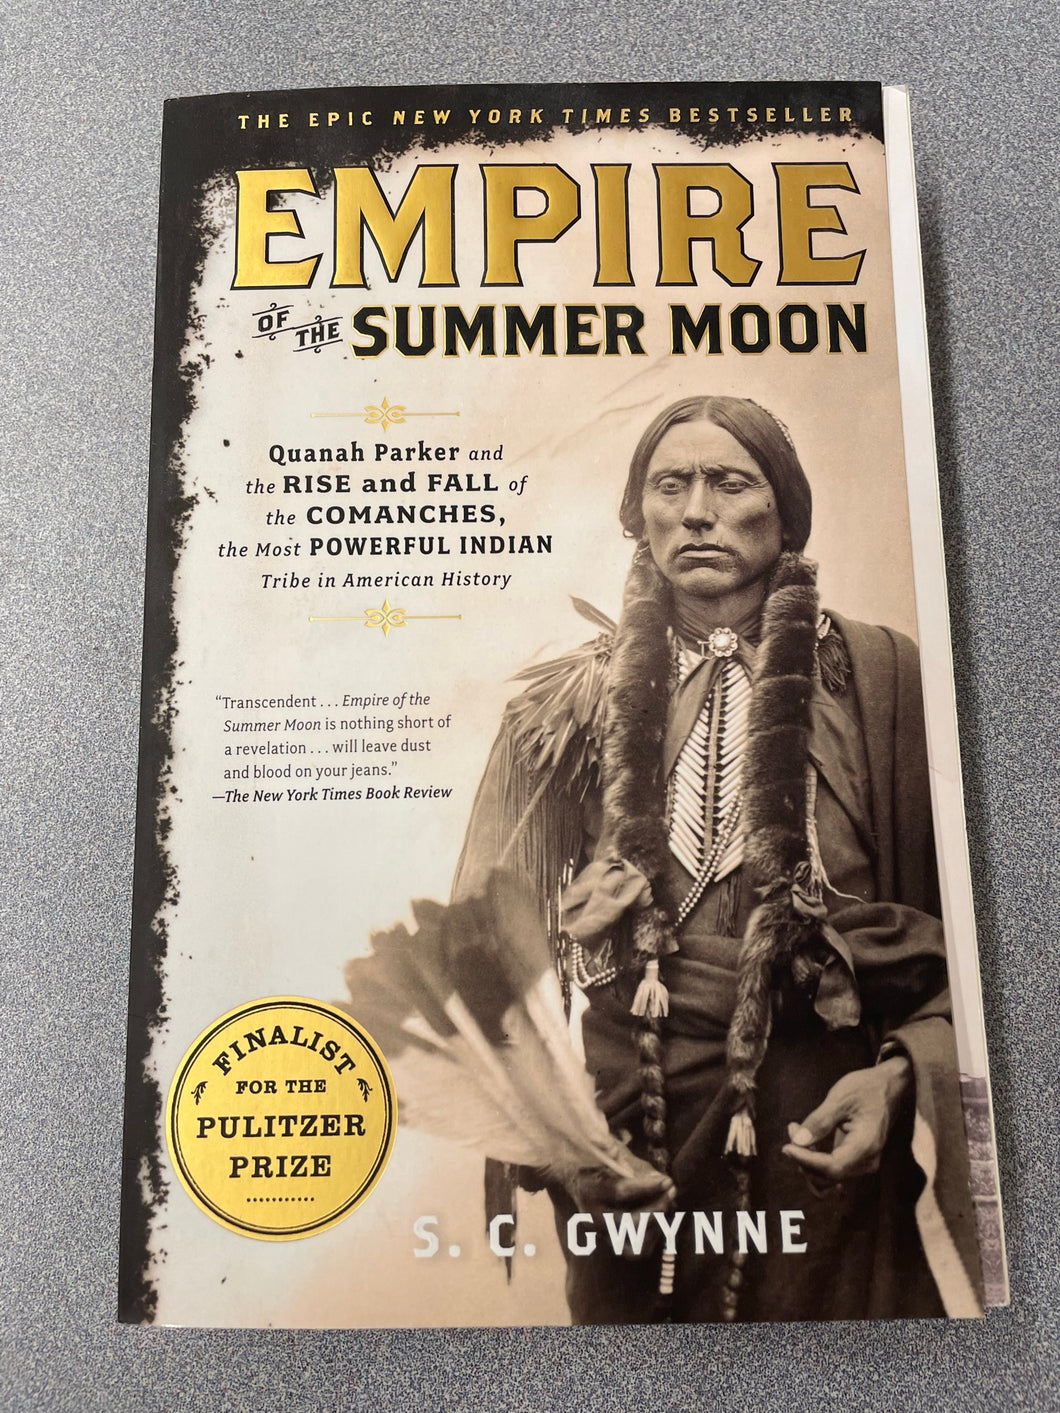 Empire of the Summer Moon: Quanah Parker and the Rise and Fall of the Comanches, the Most Powerful Indian Tribe in American History, Gwynne, S. C.  [2010] ML 9/23